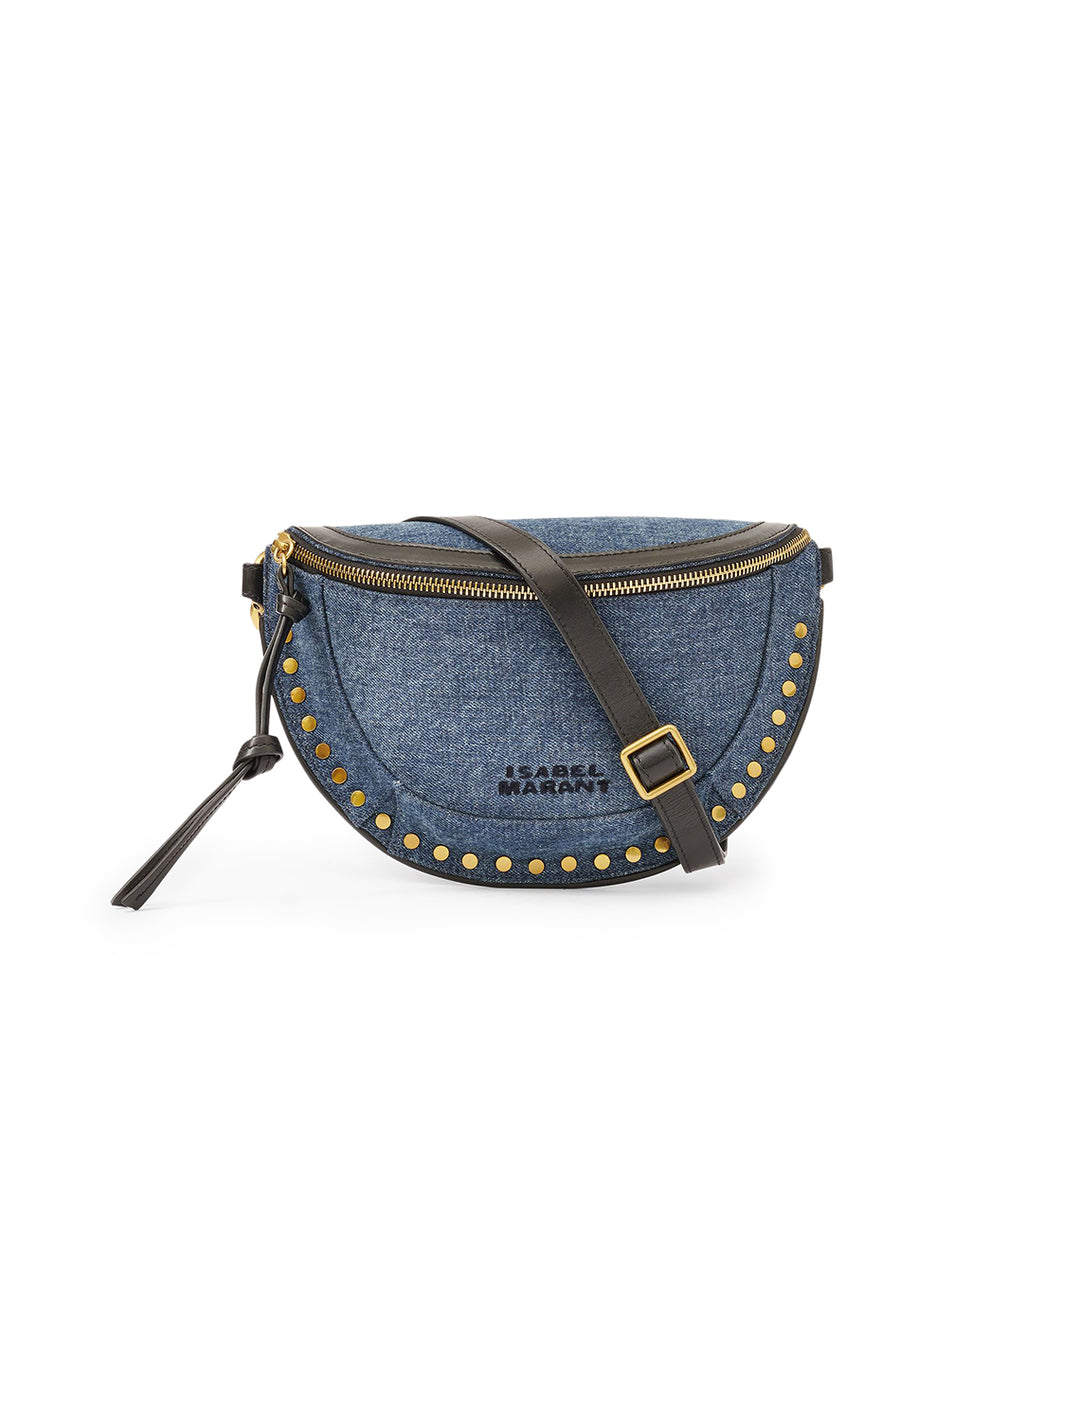 Front view of Isabel Marant Etoile's skano in dark blue.